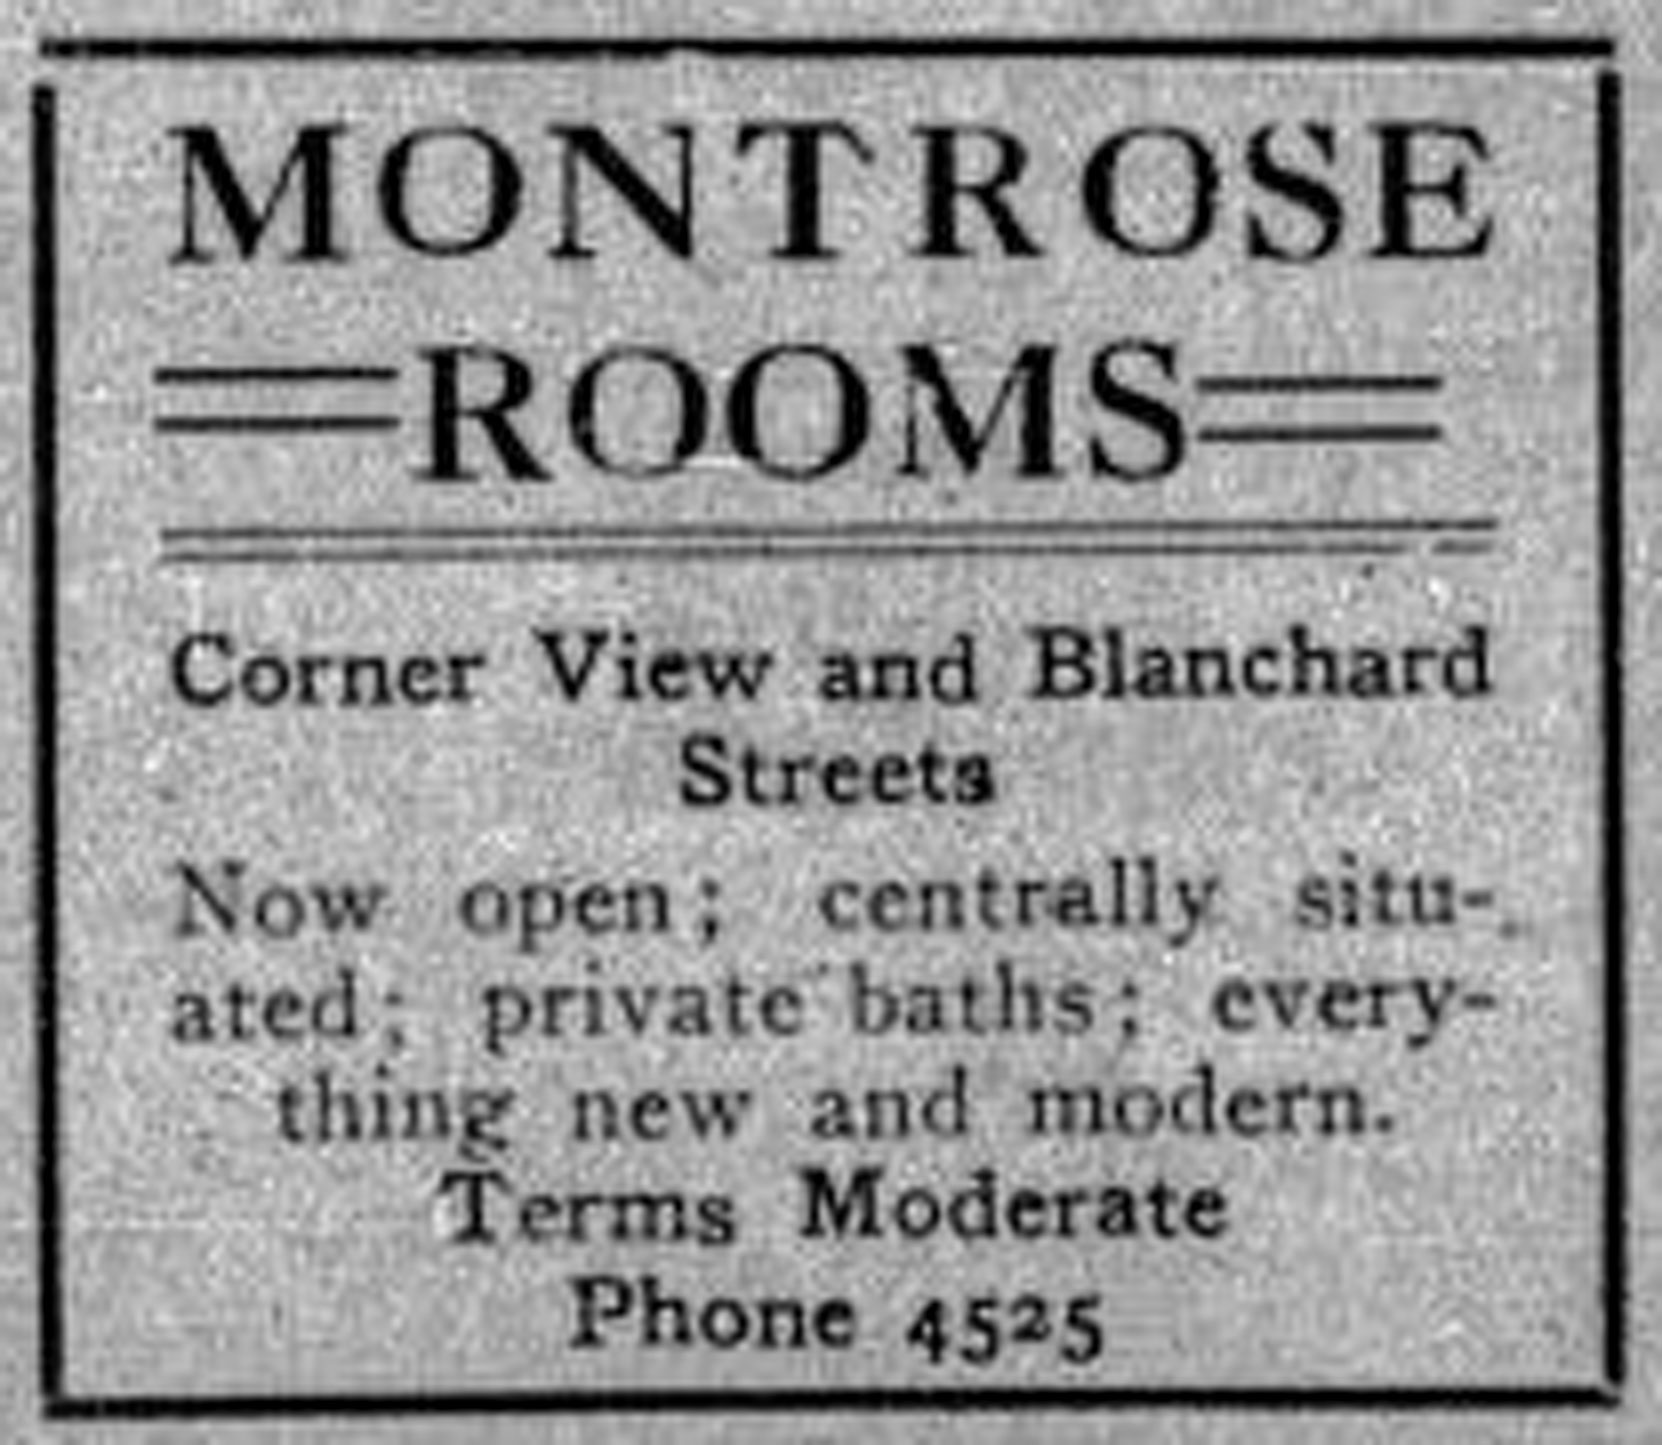 1913 advertisement for Montrose Rooms, corner View and Blanchard Streets. The Montrose Rooms, now known as the Montrose Apartments, is still standing at 1114-1126 Blanshard Street (Victoria Online Sightseeing Tours collection)